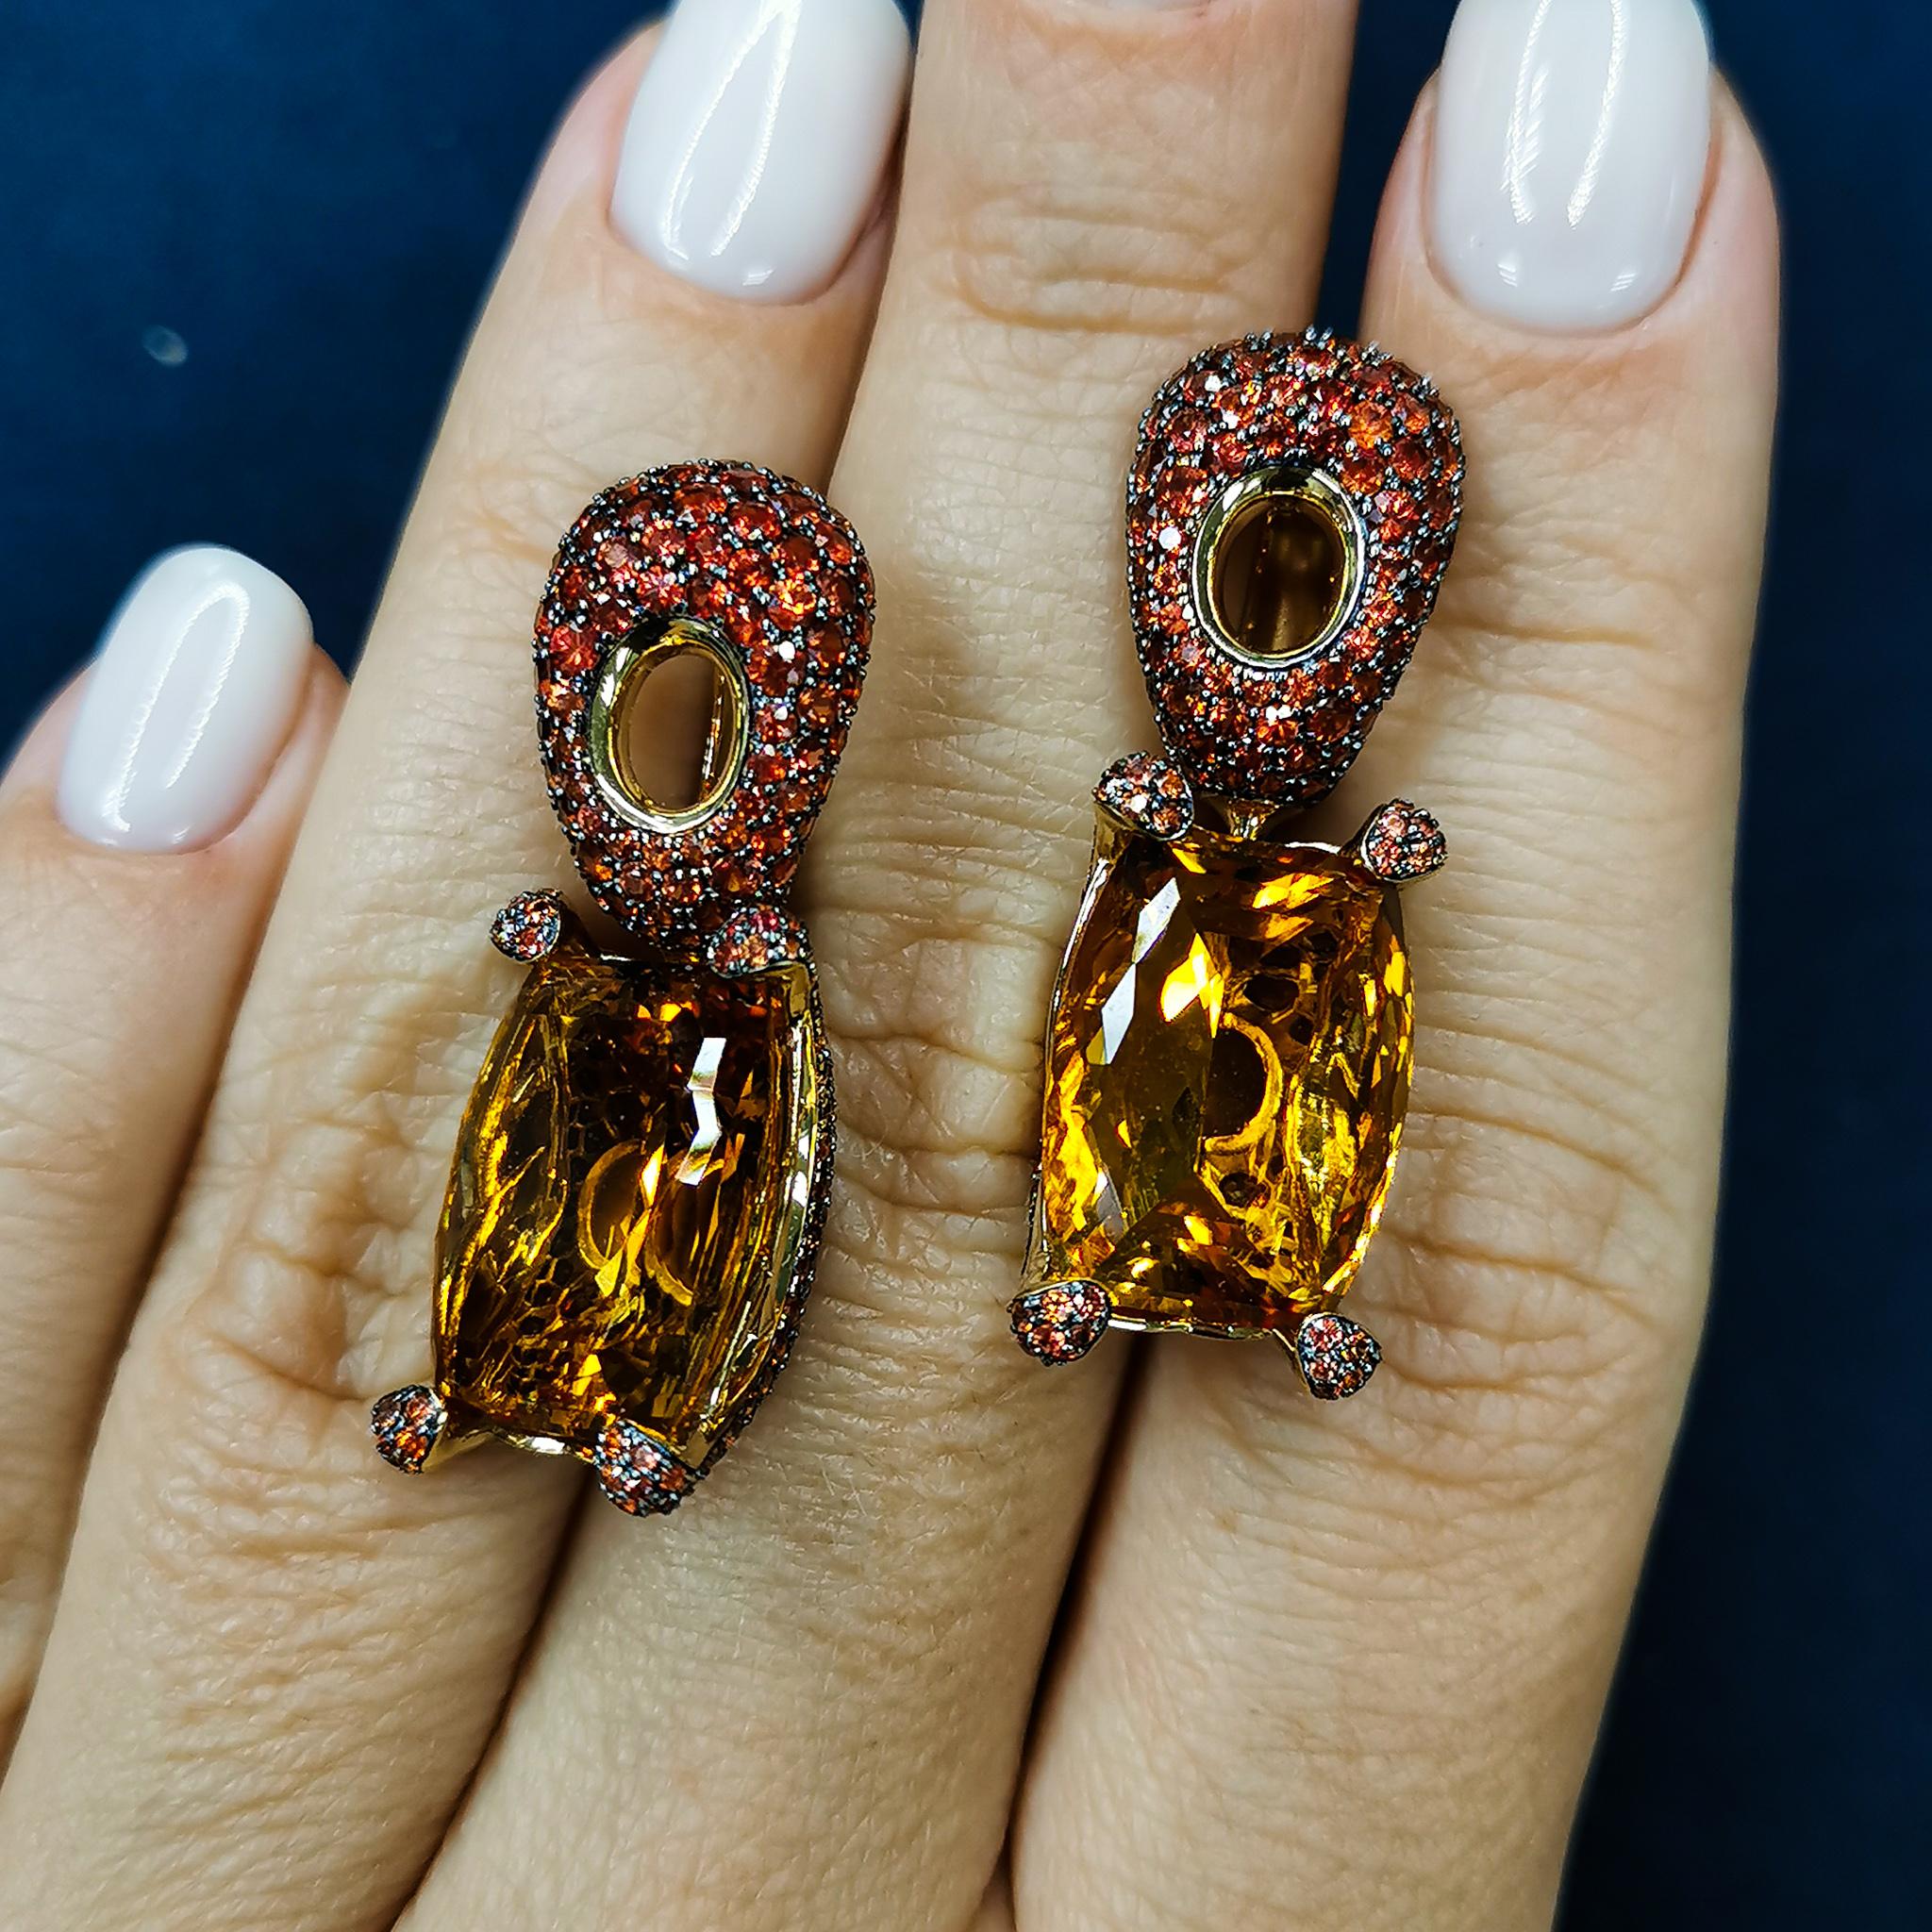 Citrine 16.74 Carat Orange Sapphires 18 Karat Yellow Gold Earrings
Highlighting two 16.74 Carat Citrine and 462 Orange Sapphires weighing 5.92 Carats are mounted on an 18 Karat Gold lined with black rhodium. It displays a riveting interplay of